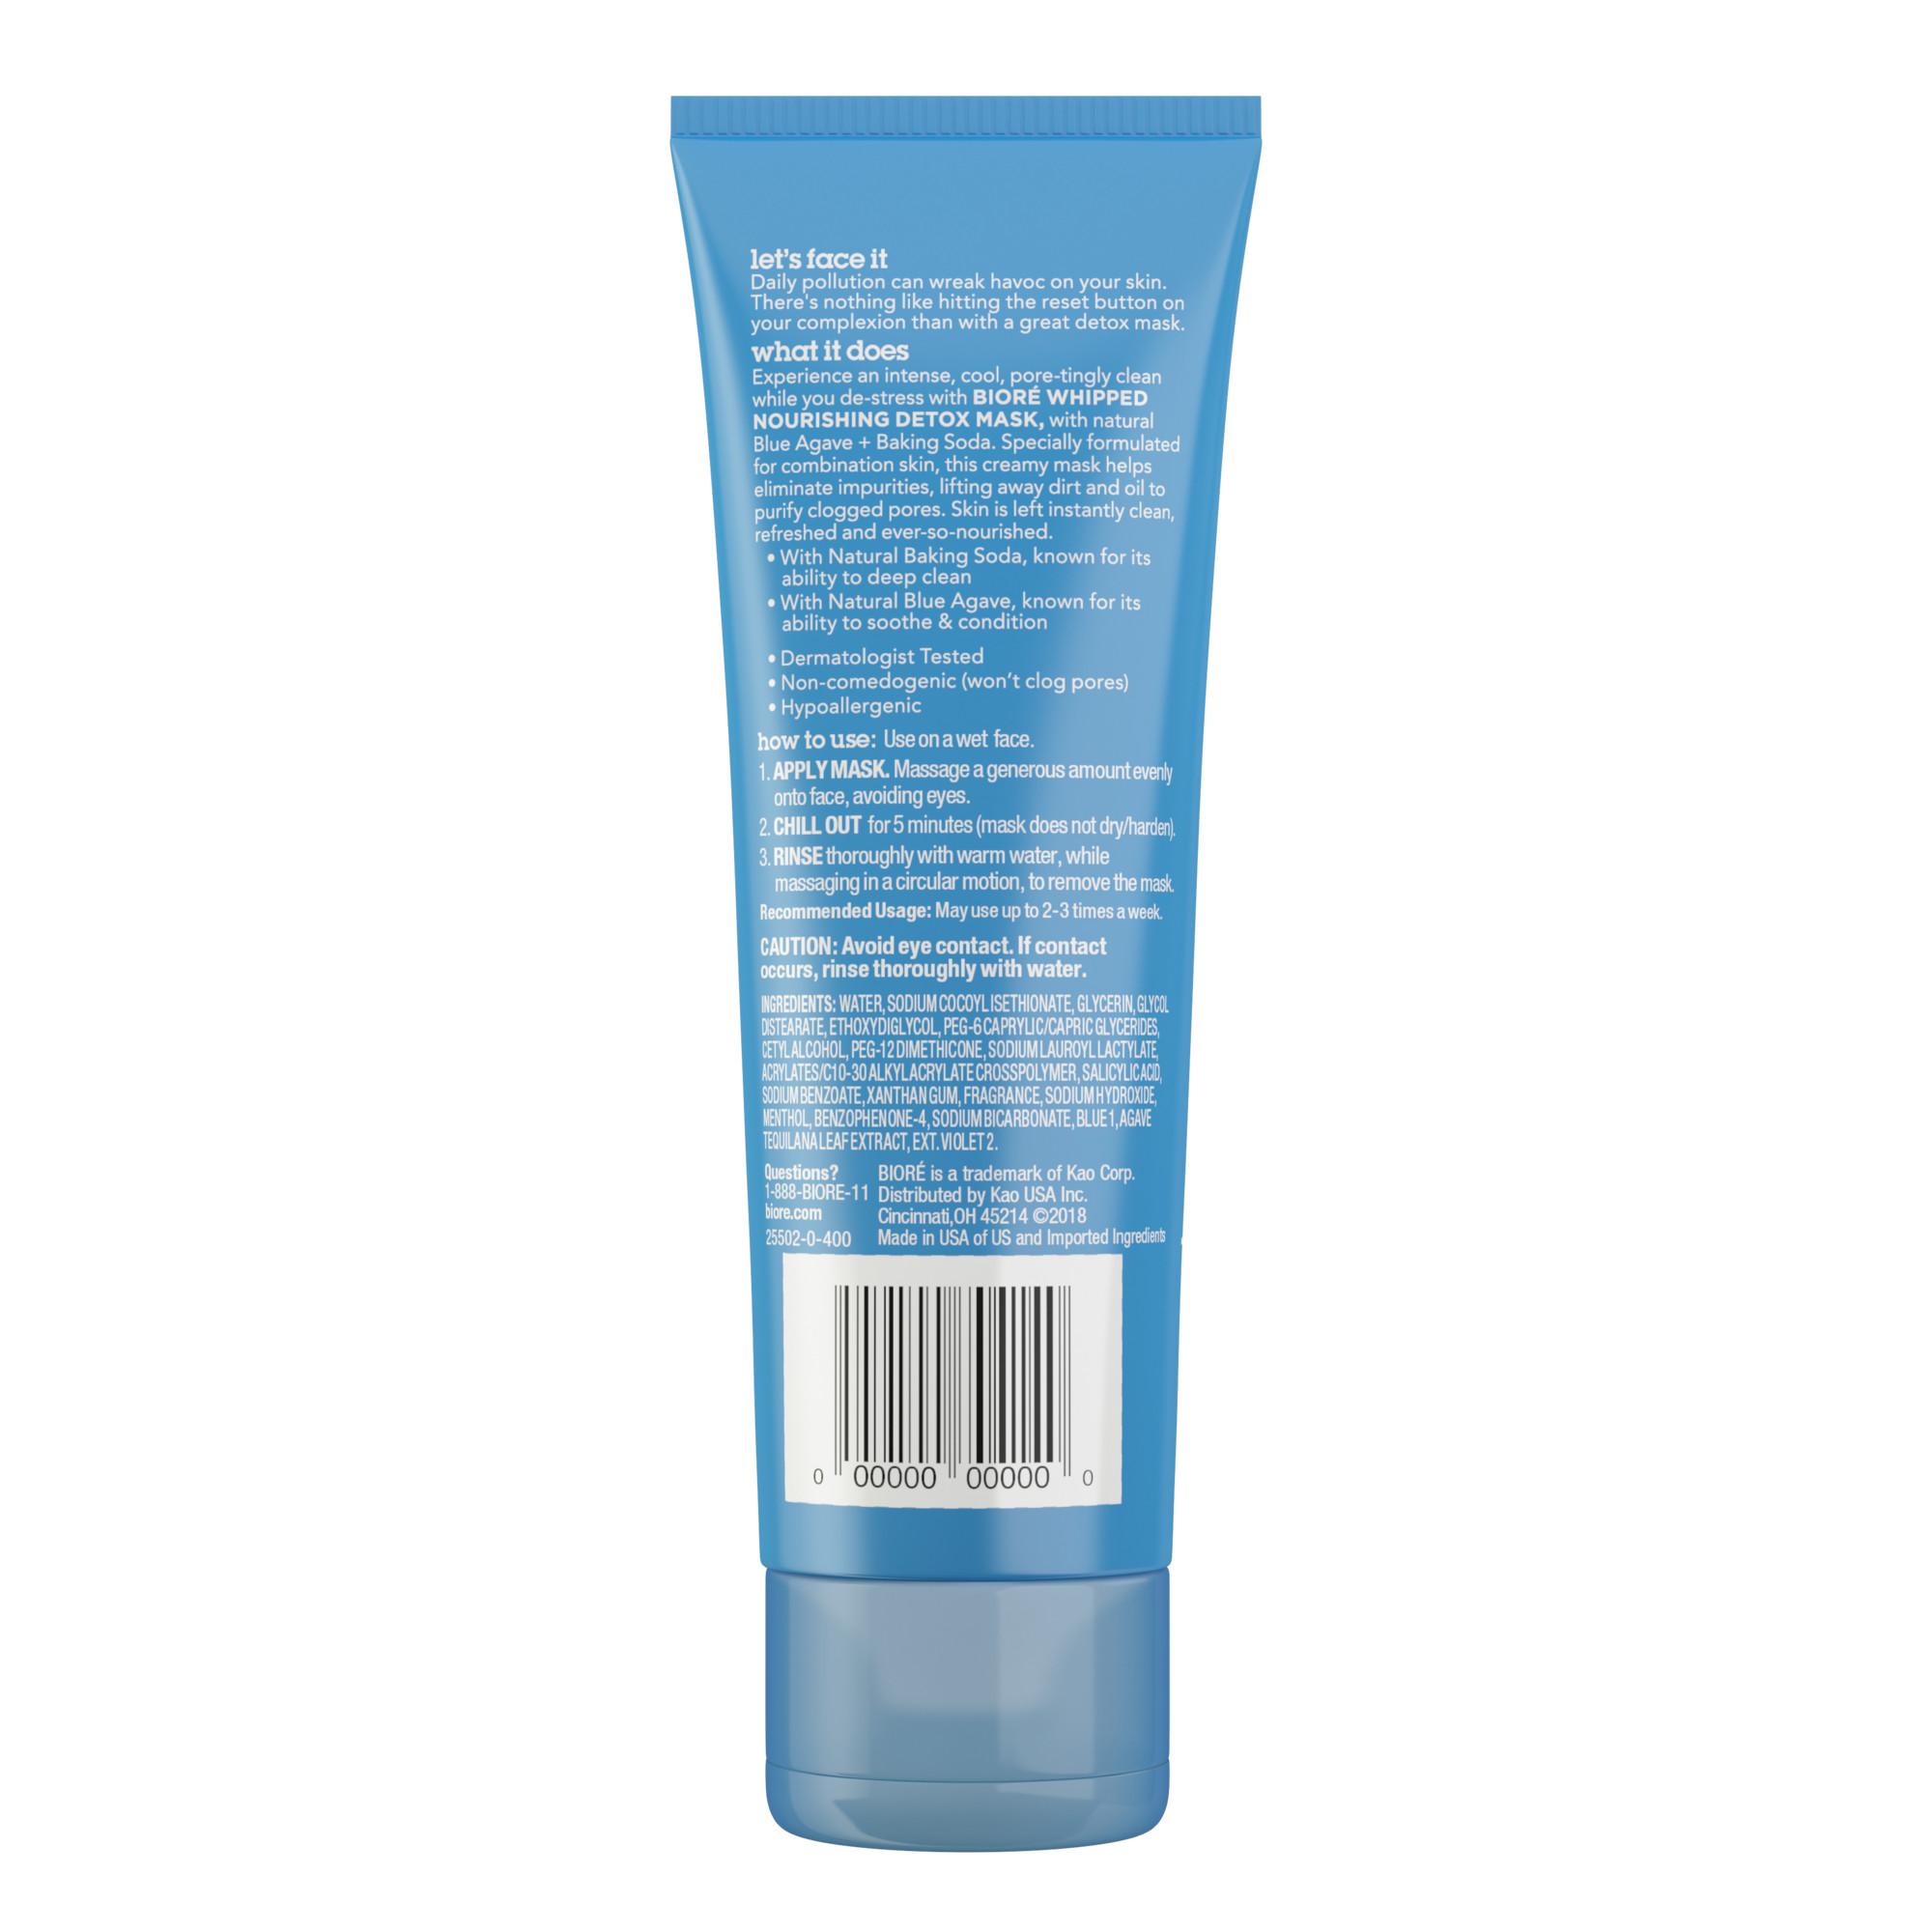 Biore Blue Agave & Baking Soda Face Mask for Combination Skin, Whipped Cooling Mask, 4 fl oz - image 2 of 2